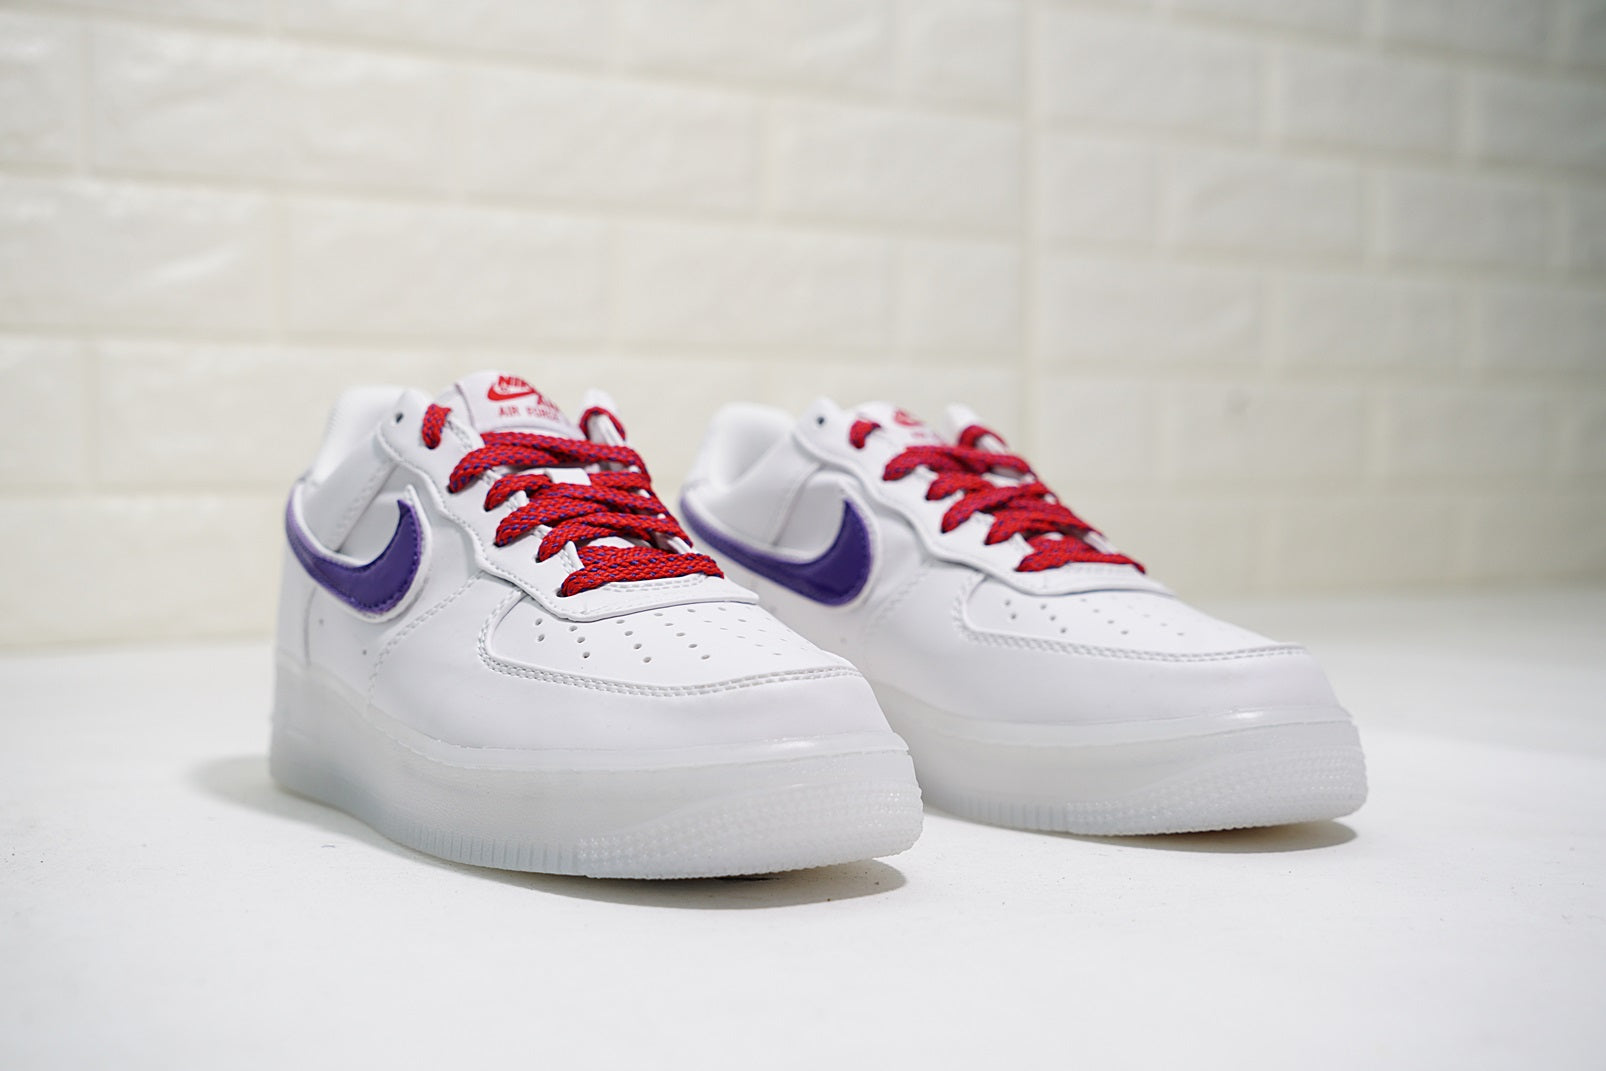 Air Force 1 Low “De Lo Mio” - whatever on 